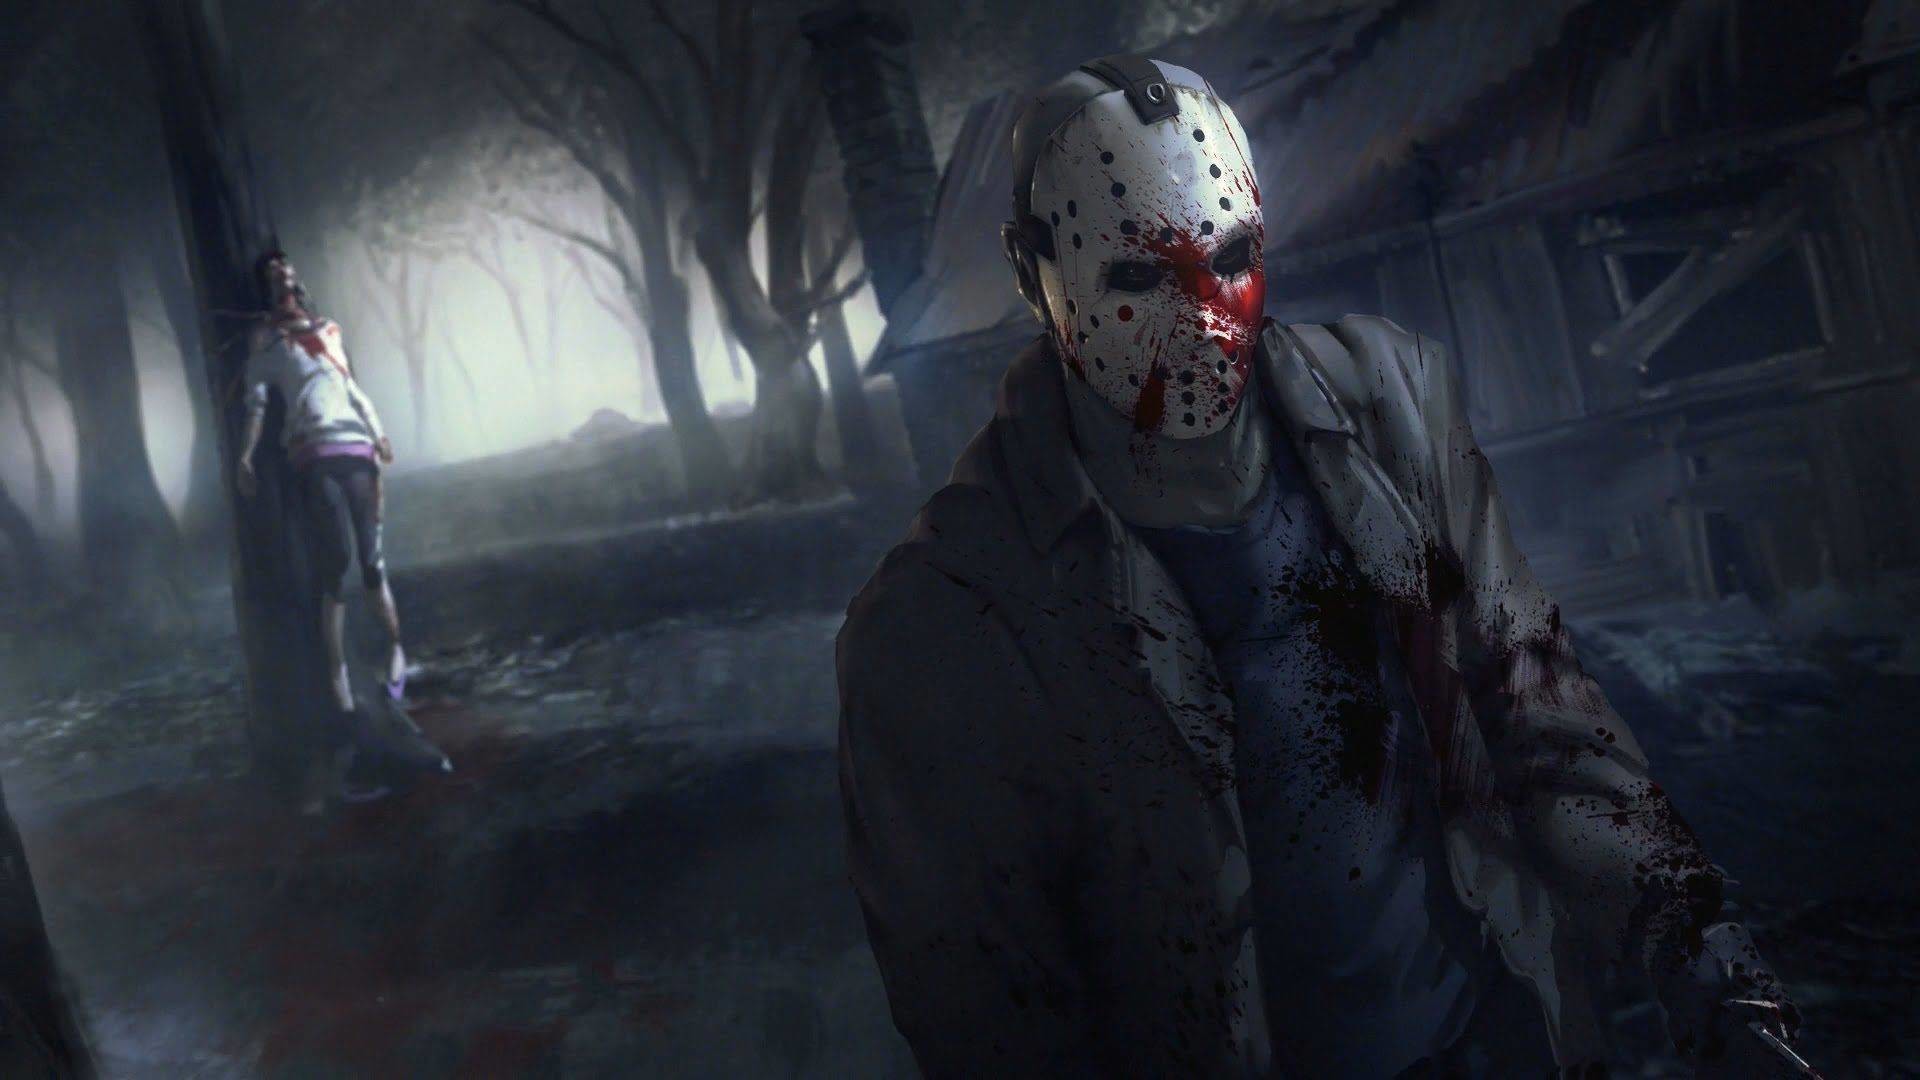 jason execution other player in friday the 13th the game